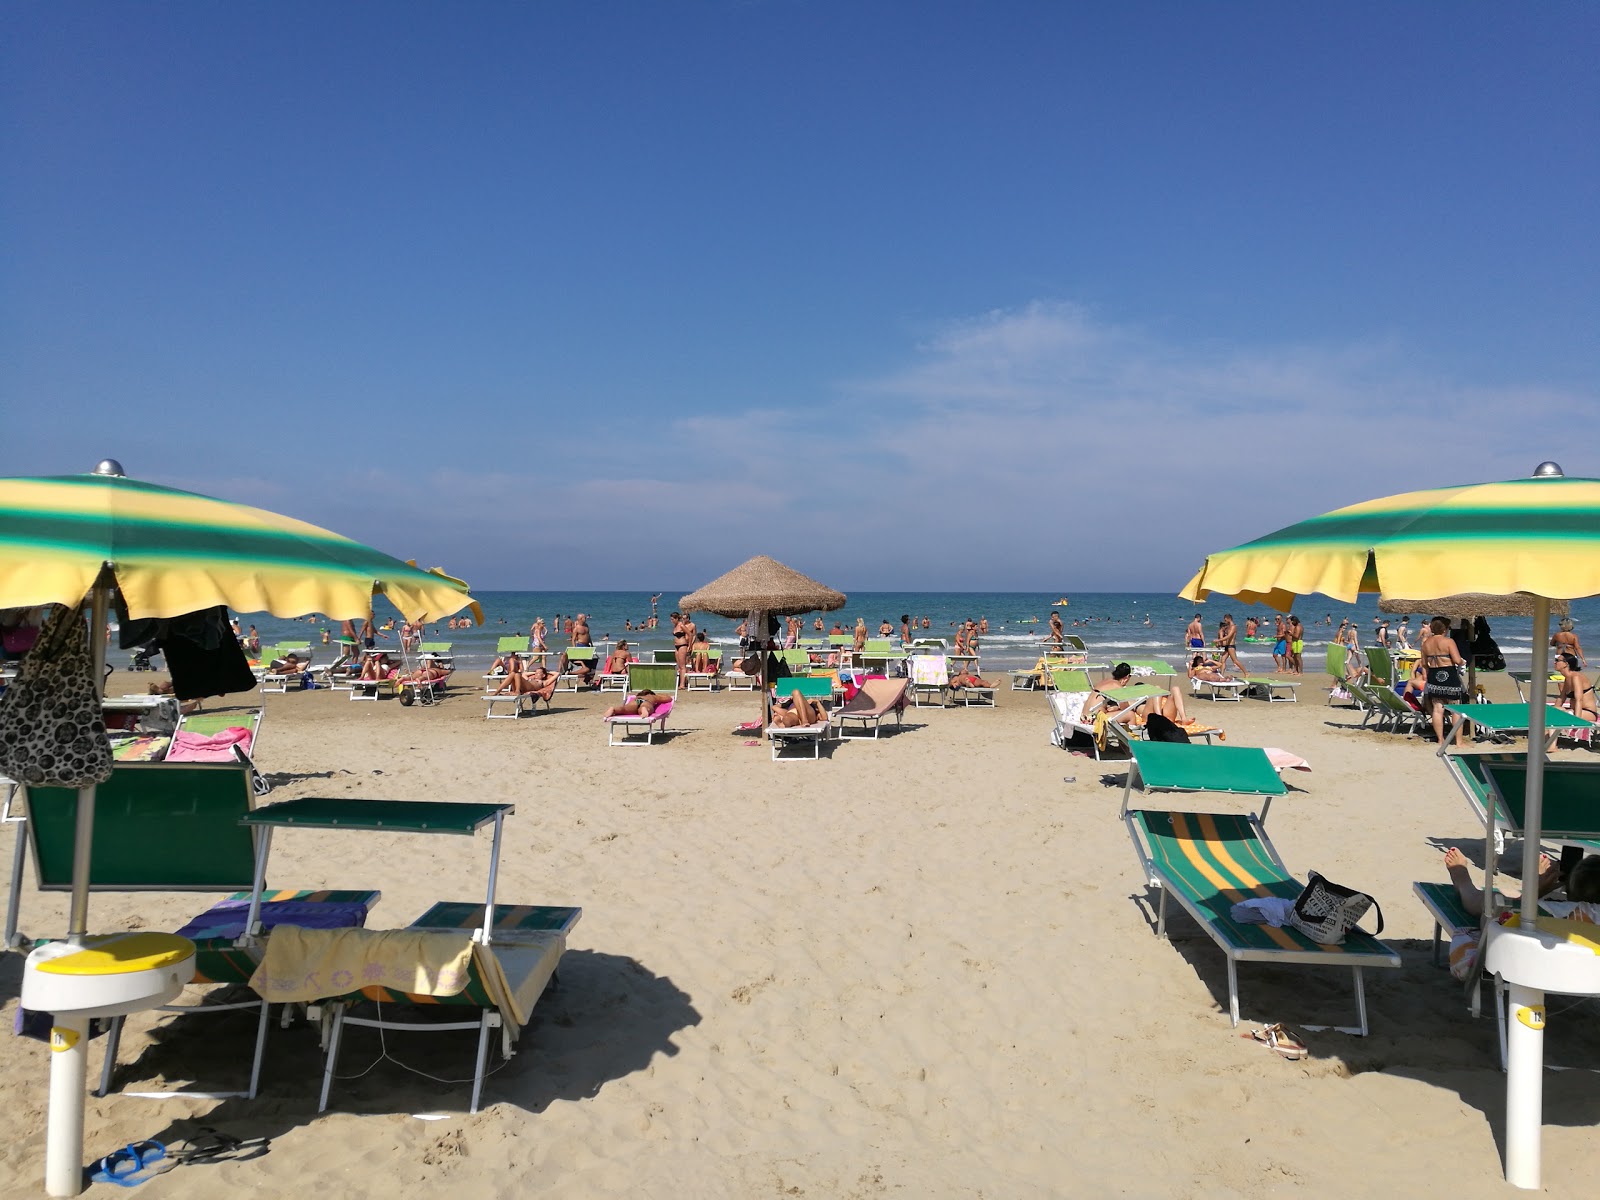 Photo of Spiaggia Senigallia - popular place among relax connoisseurs